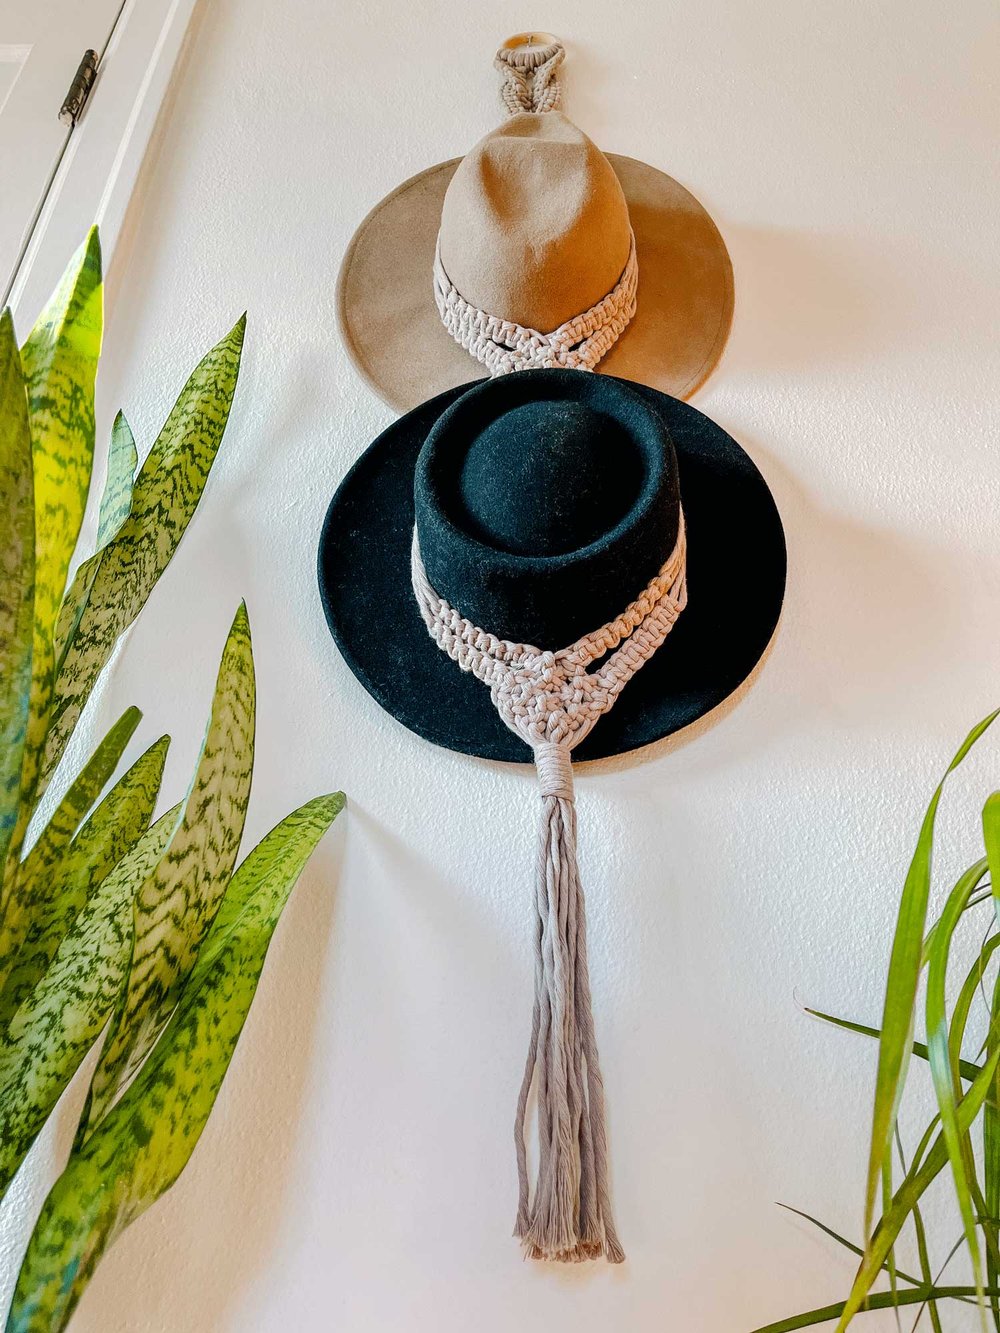 How to Make a Macrame Hanger for 2 Hats